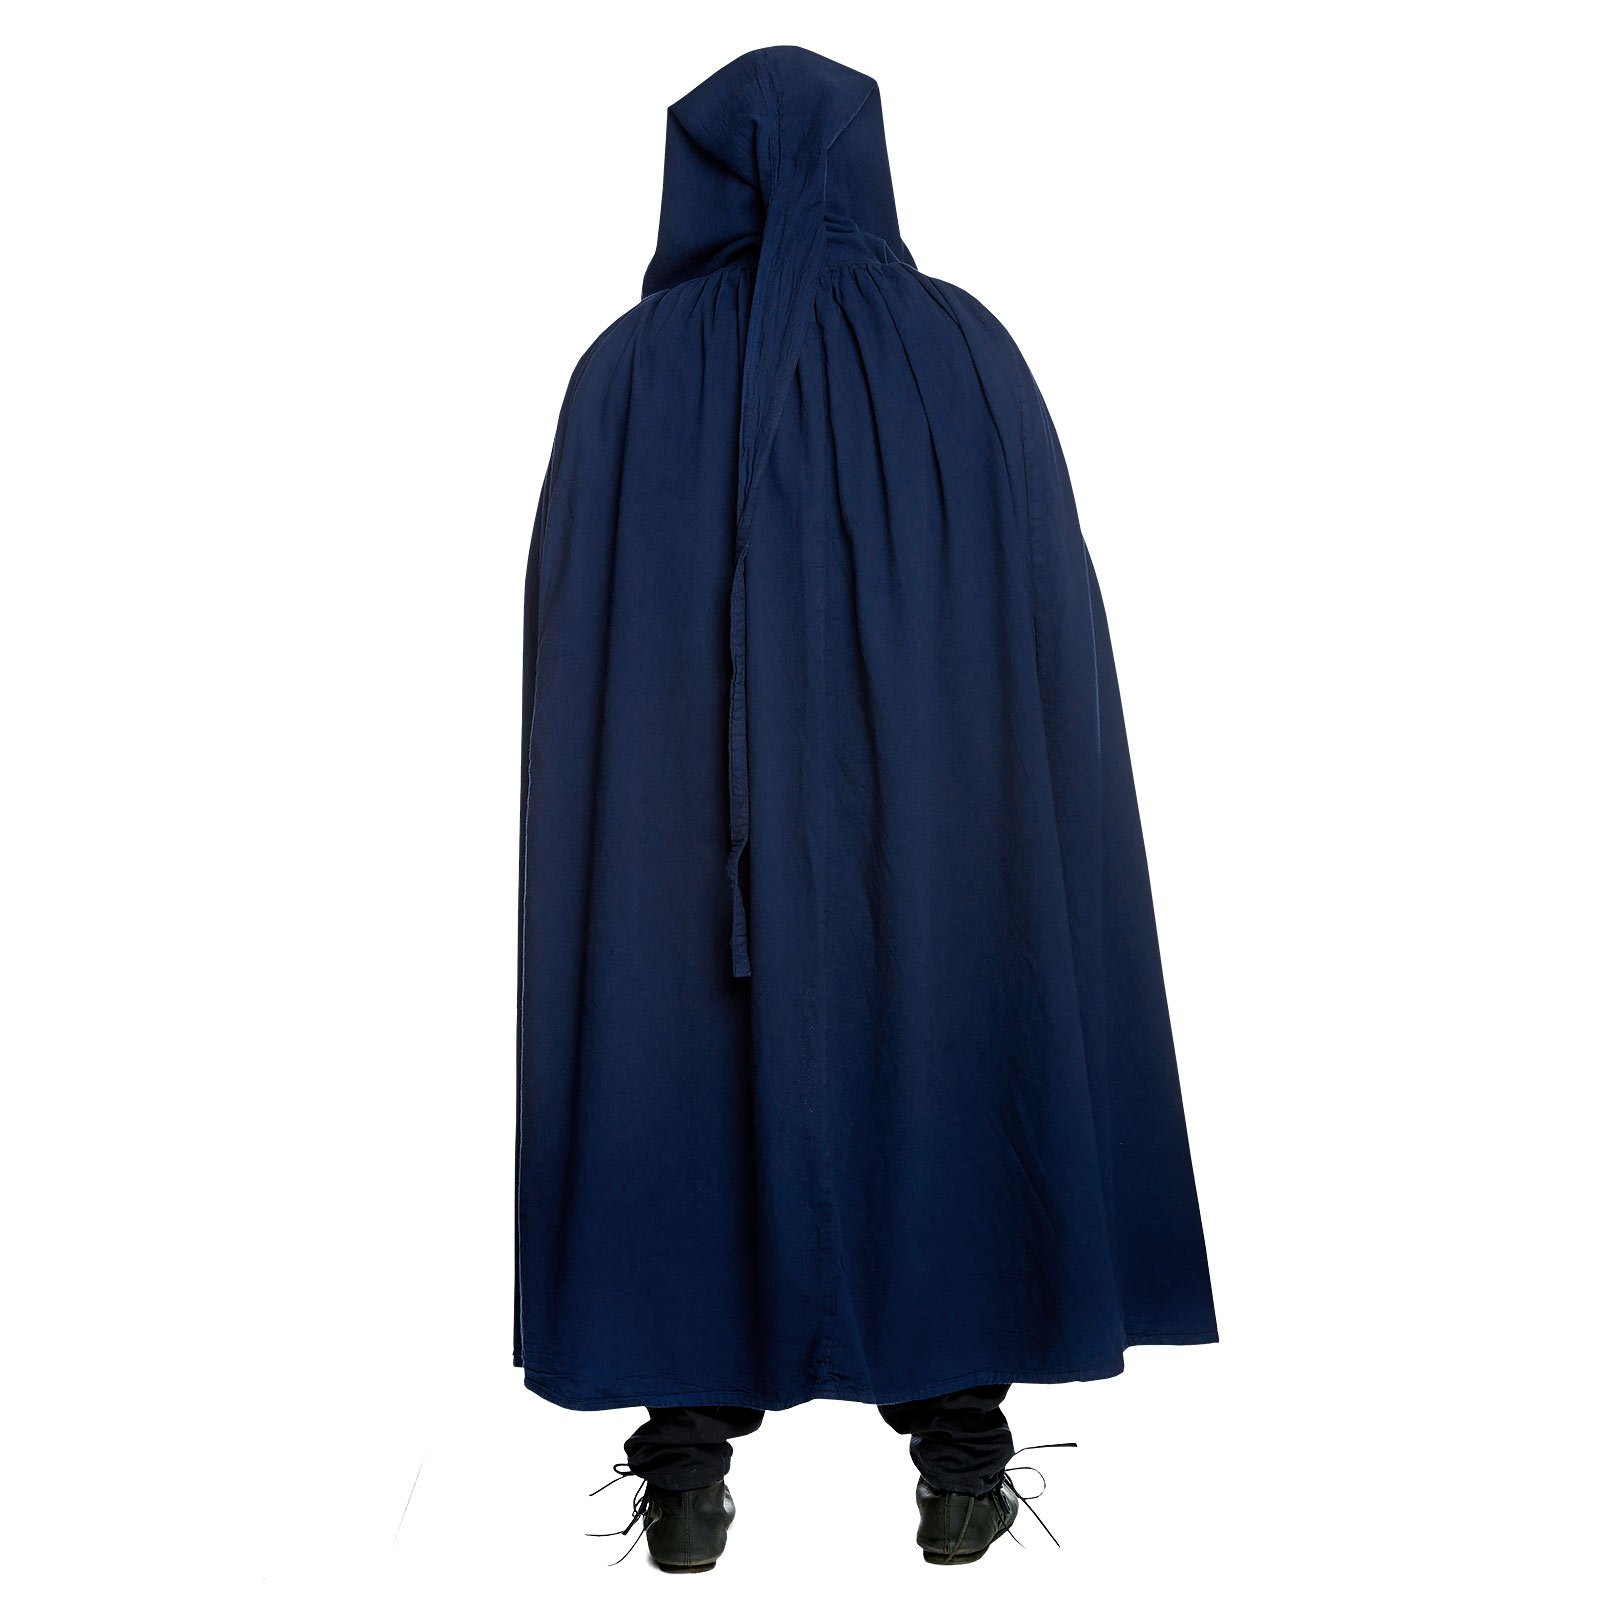 Medieval Cloak with Pointed Hood in Blue